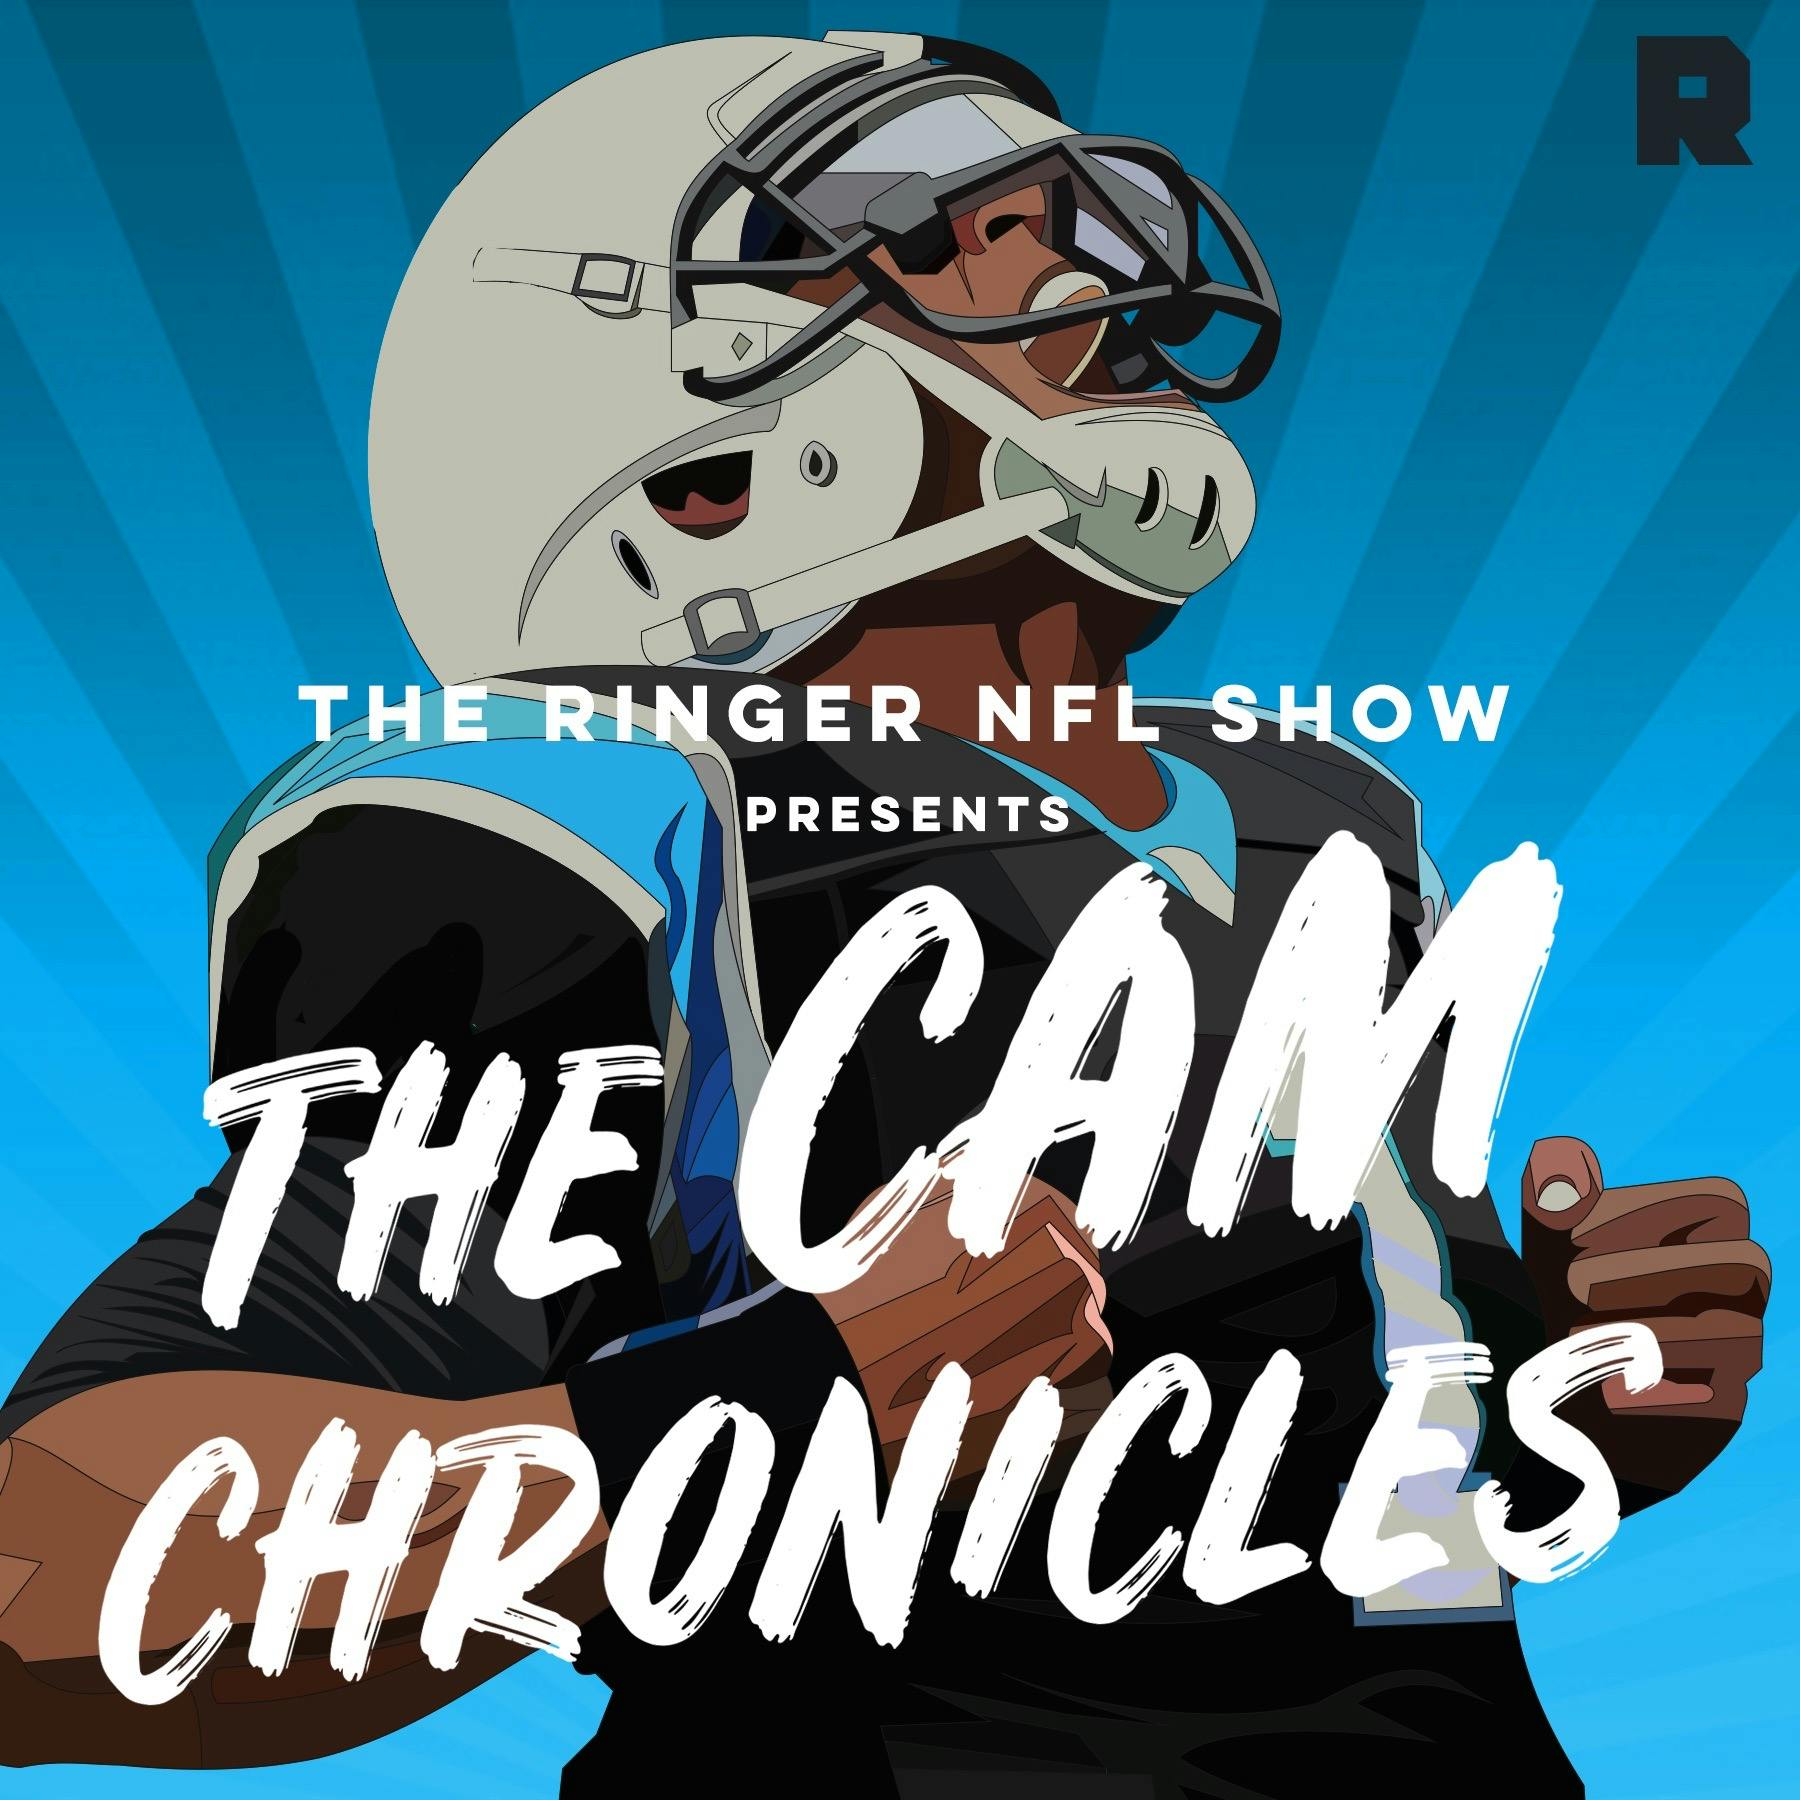 'The Ringer NFL Show' Presents 'The Cam Chronicles'